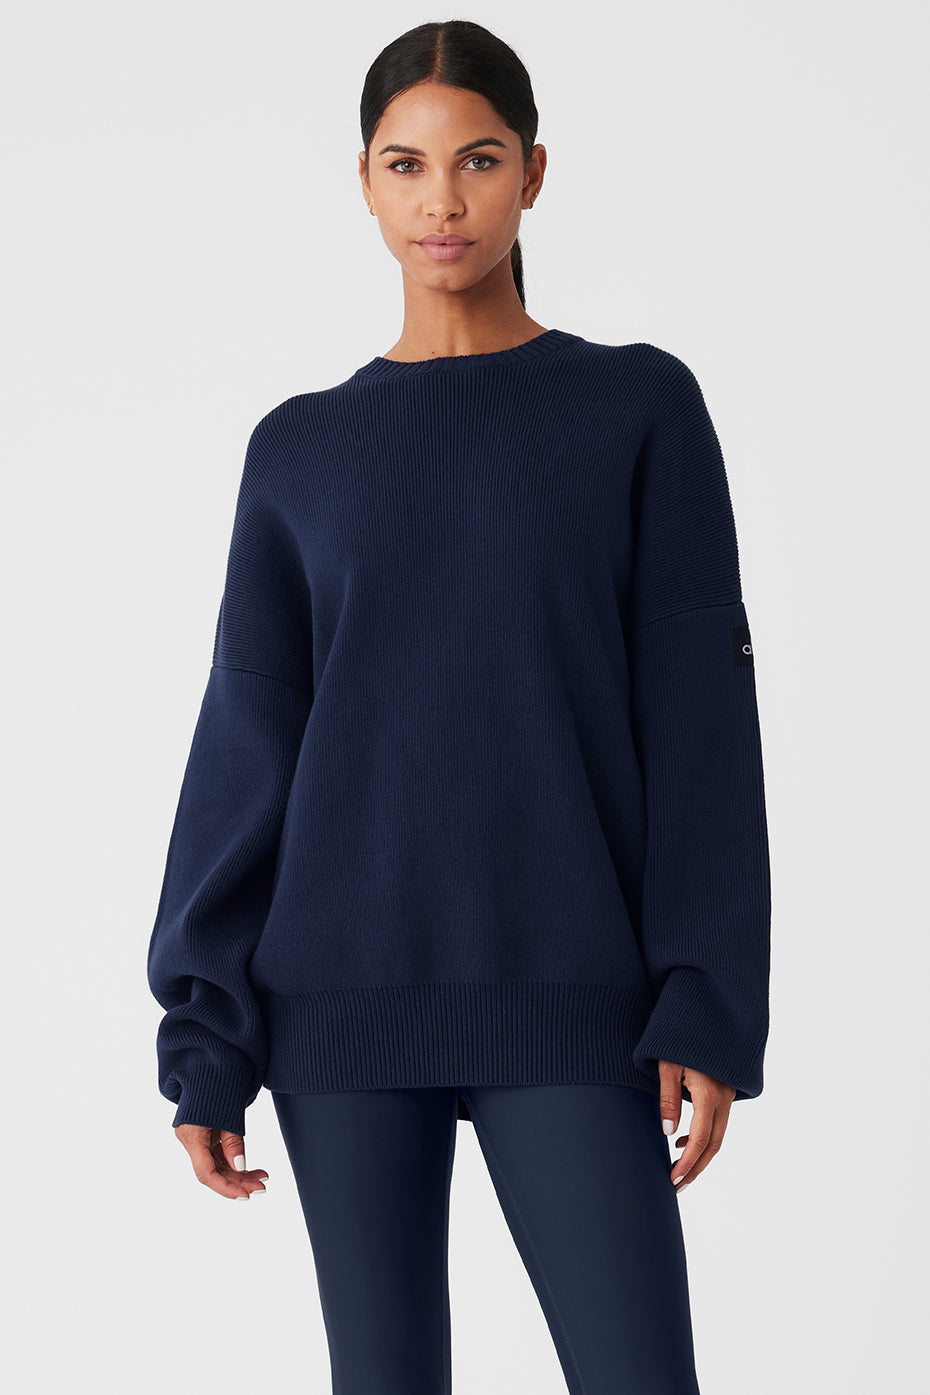 Dupe for Scholar Sweater : r/aloyoga